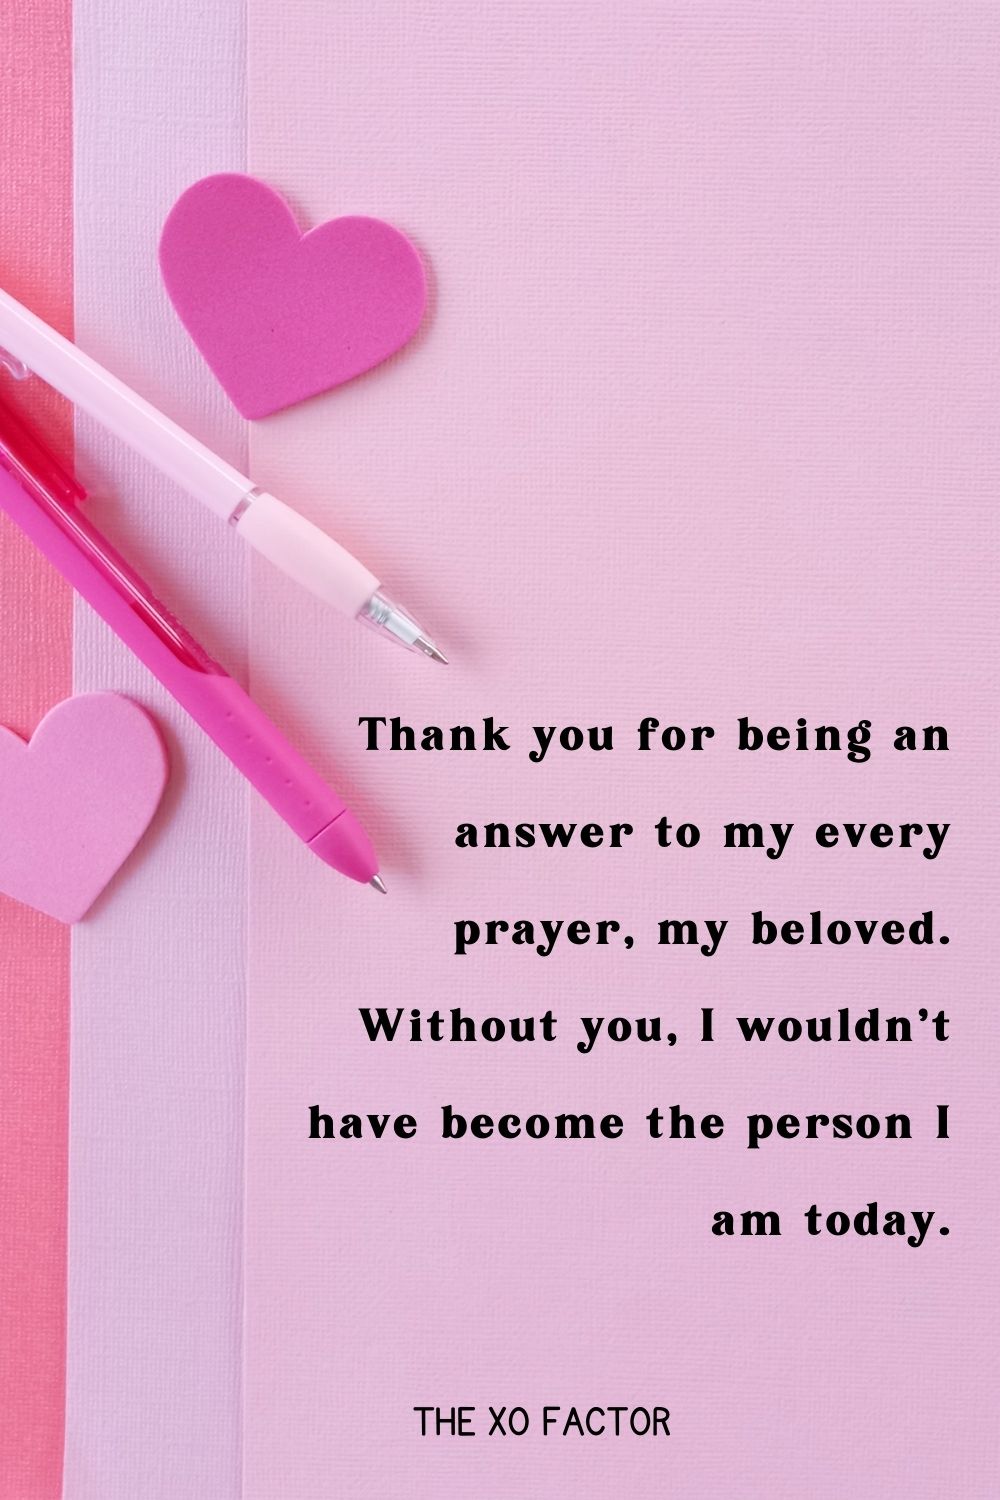 Thank you for being an answer to my every prayer, my beloved. Without you, I wouldn’t have become the person I am today.